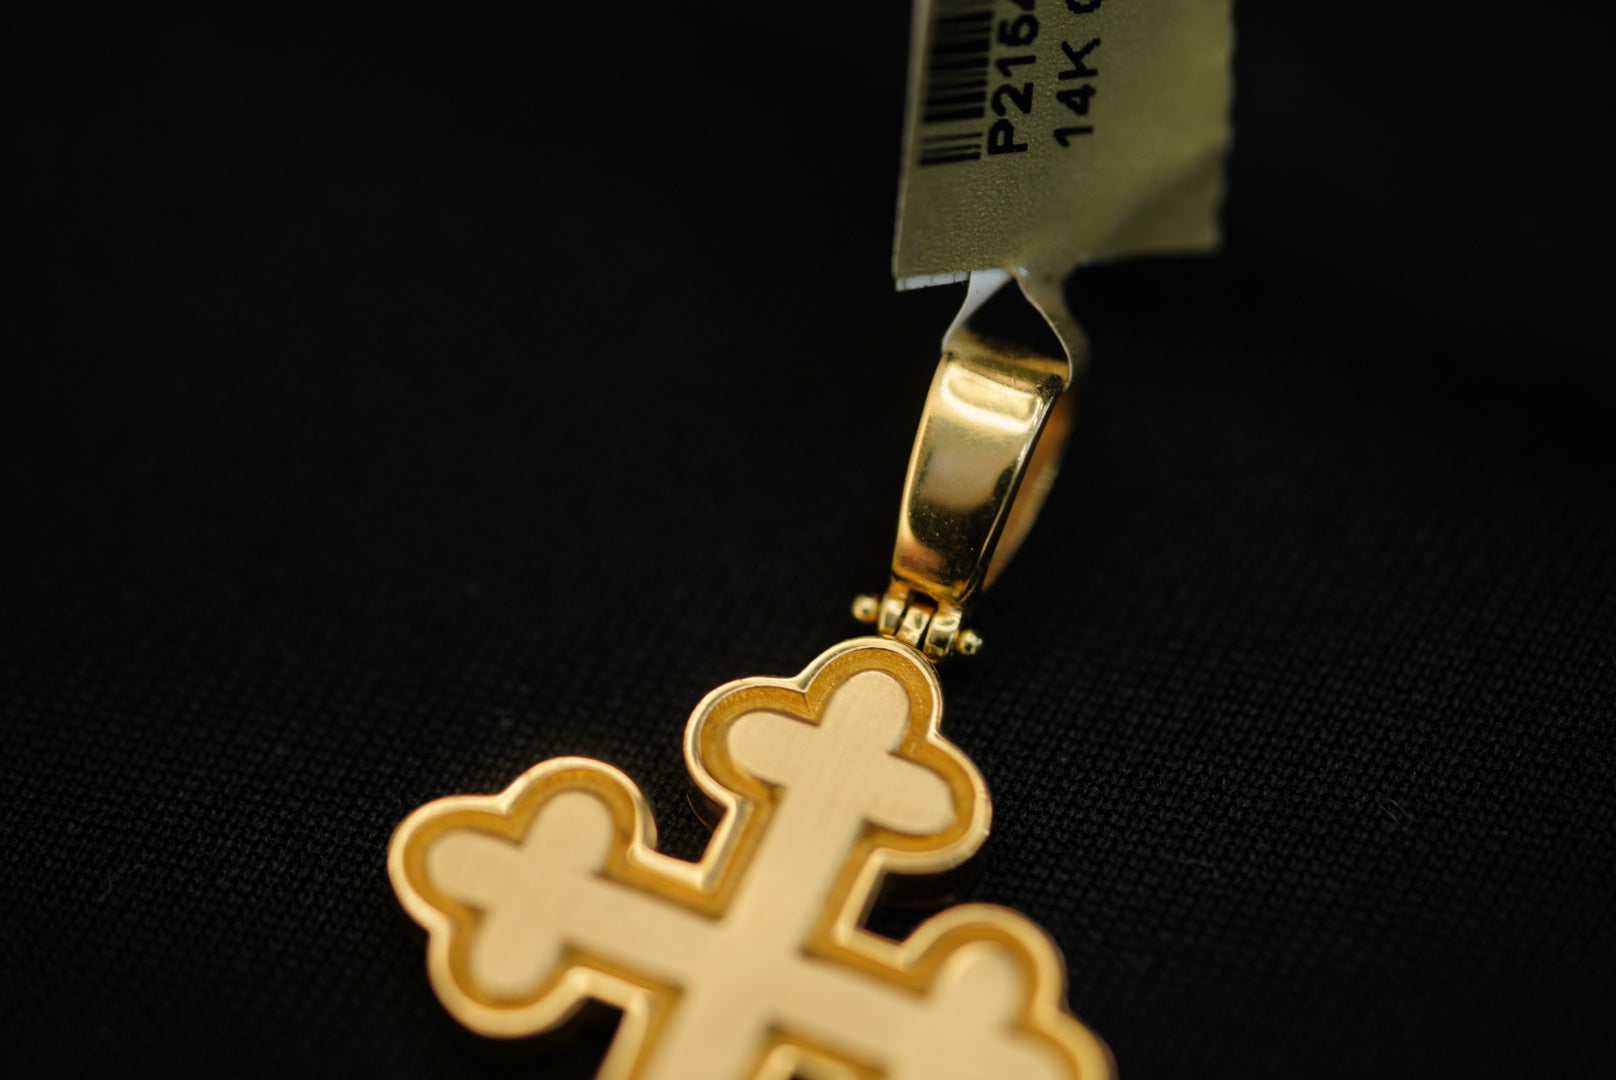 14k Antique Style Outlined Cross Pendant